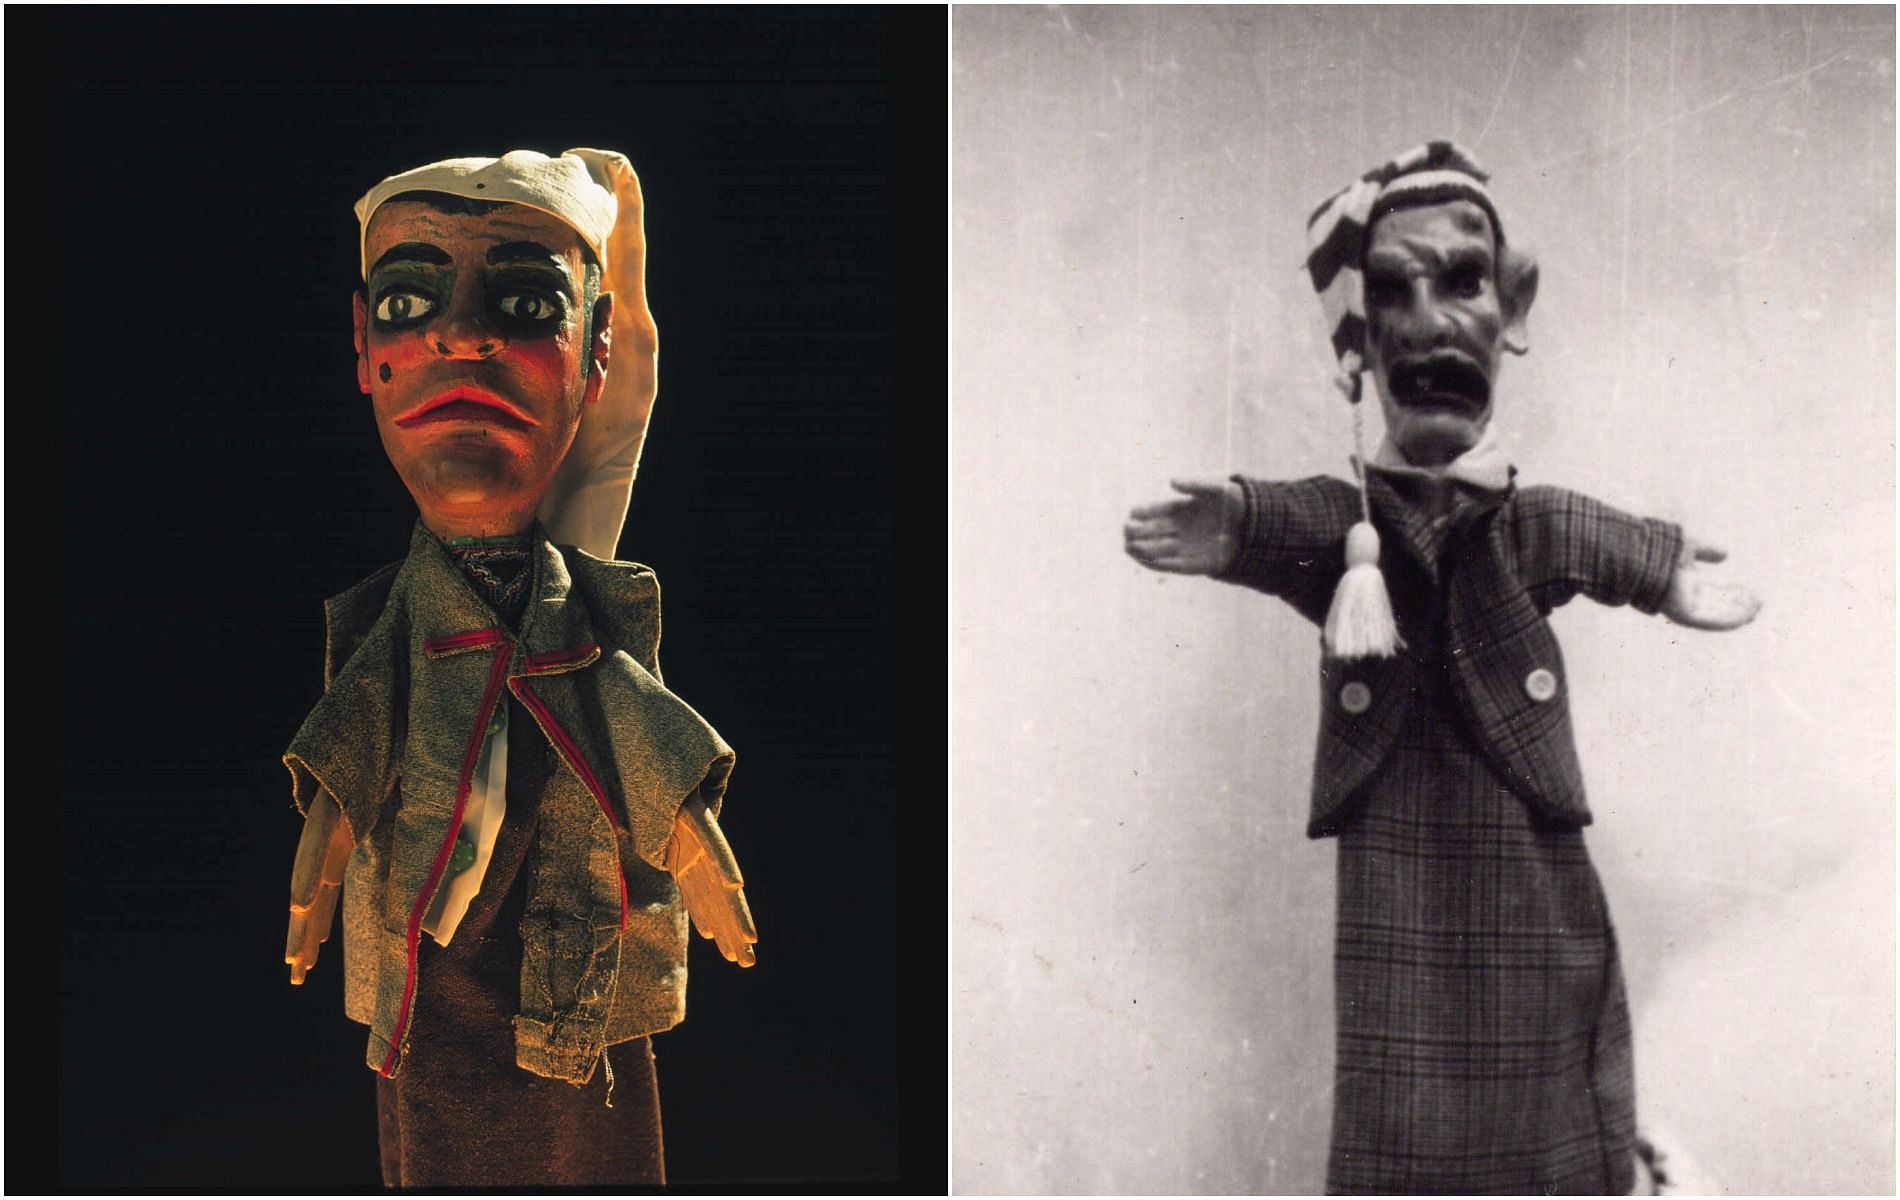 images via World Encylopedia of Puppetry